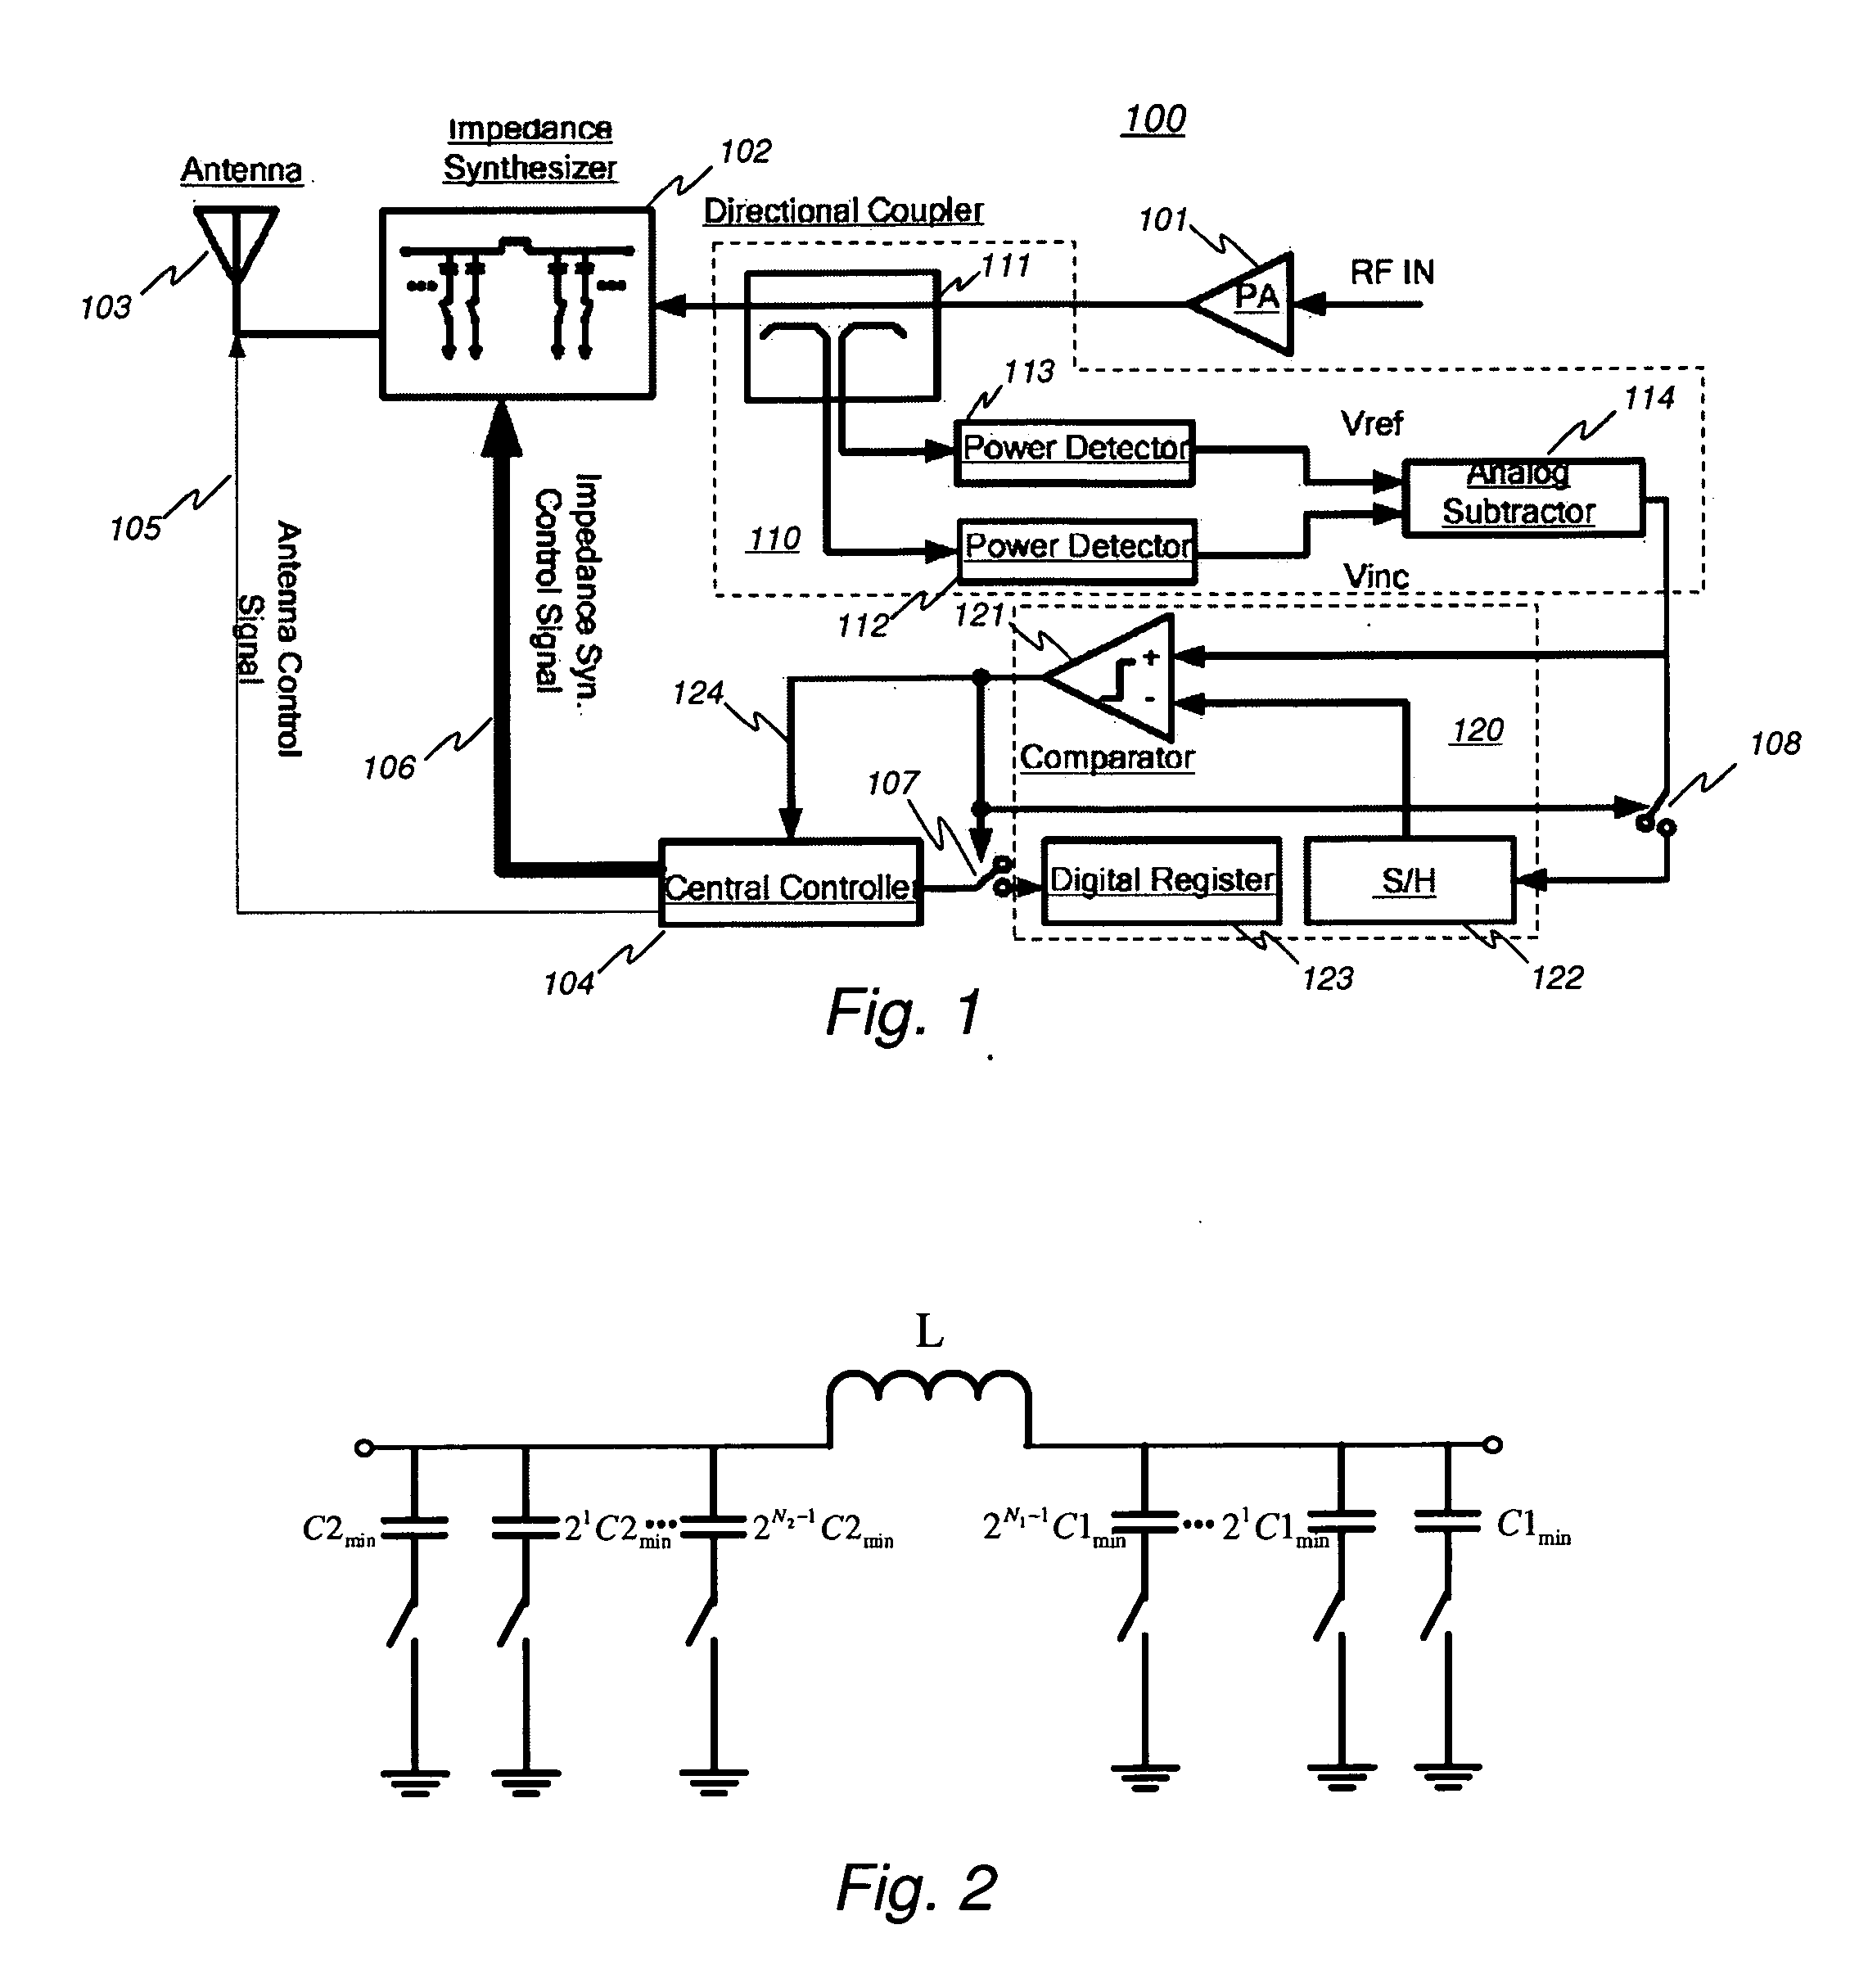 Automatic Antenna Tuning Unit for Software-Defined and Cognitive Radio